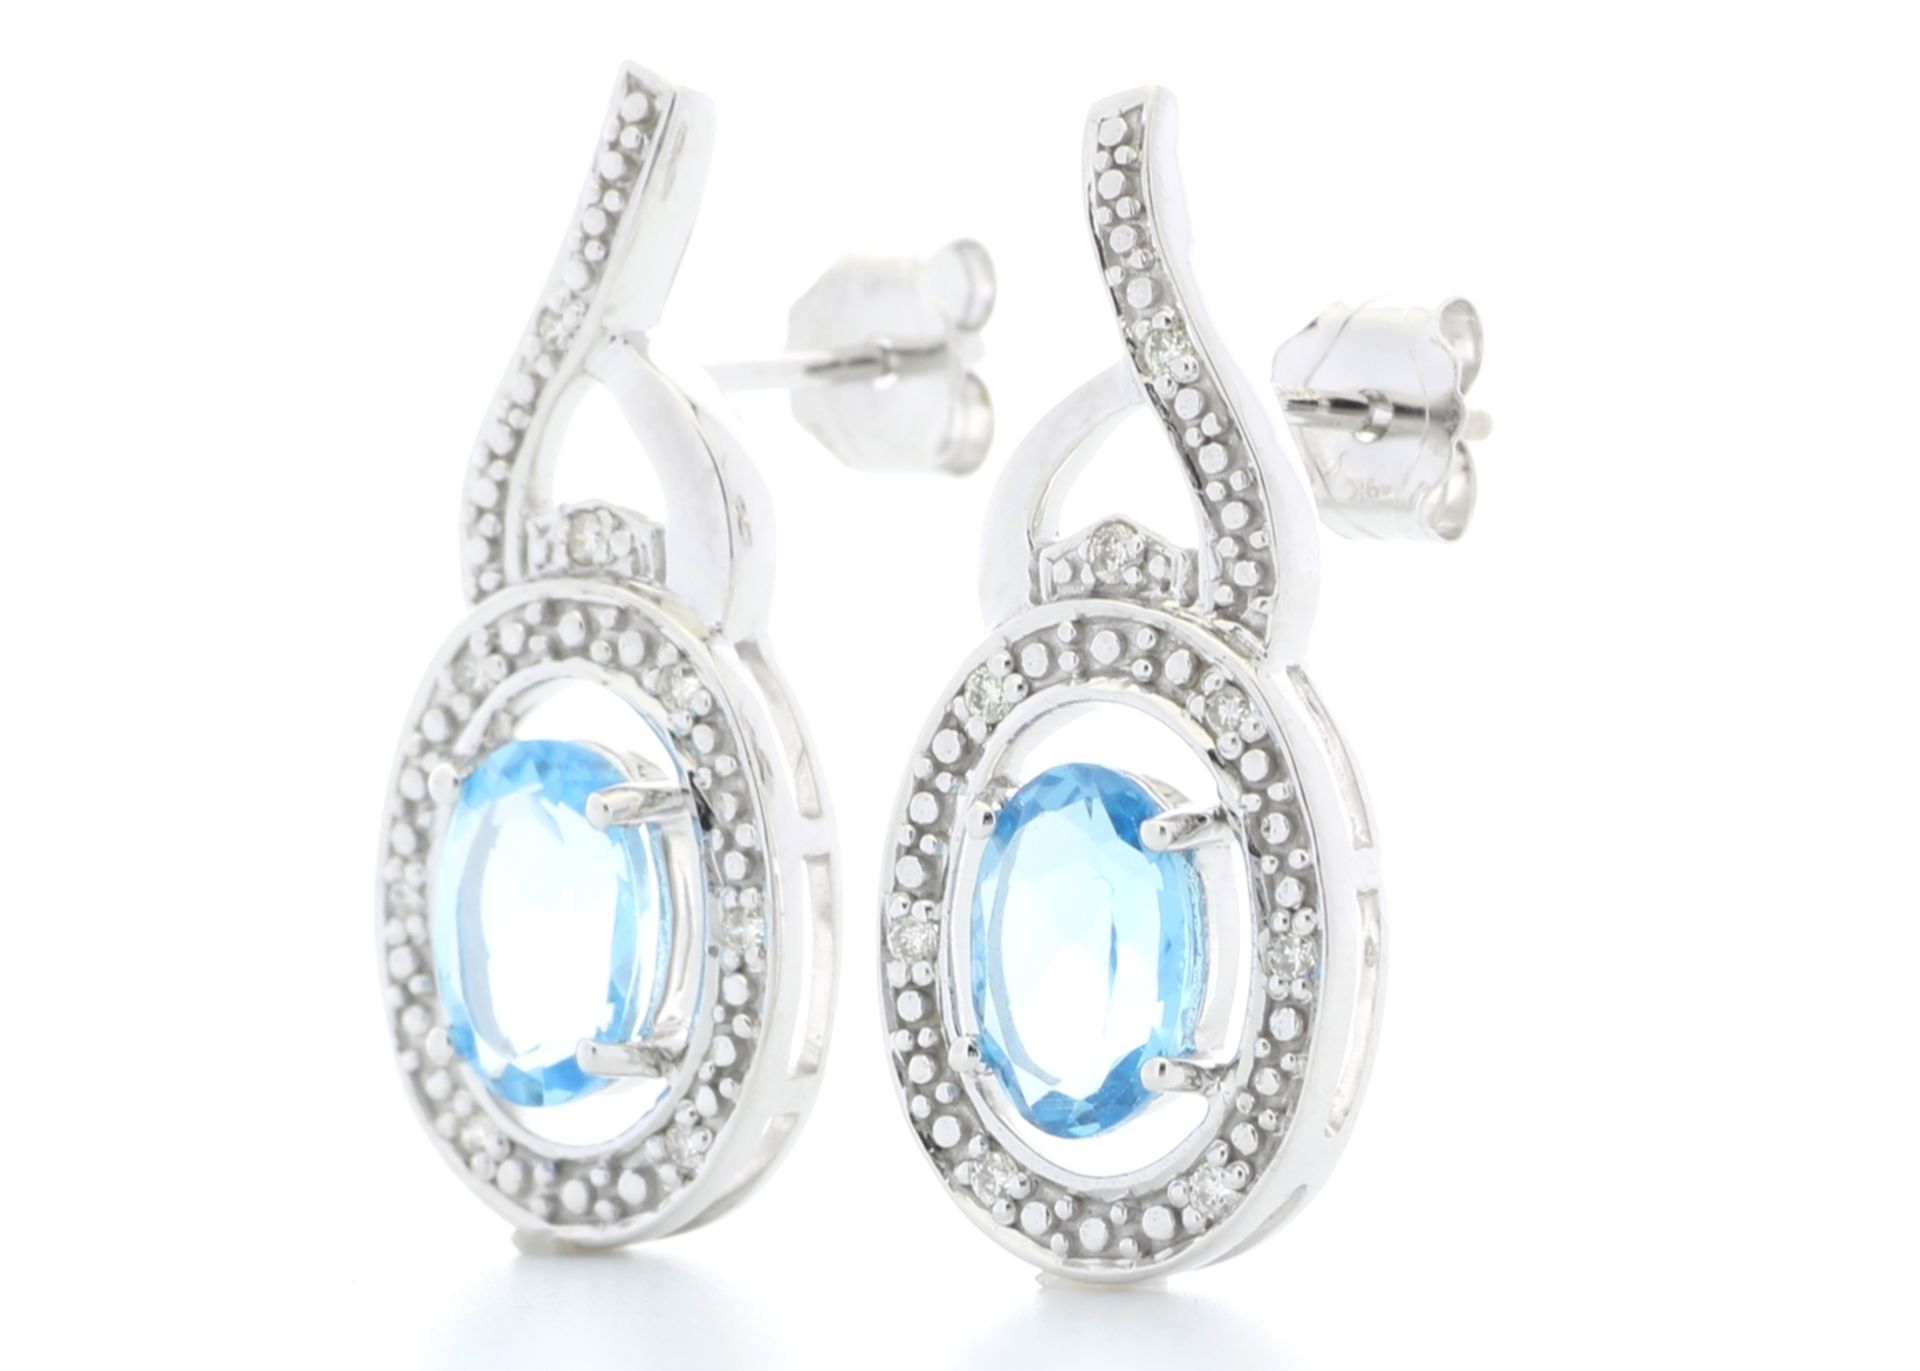 9ct White Gold Diamond And Blue Topaz Earring (BT1.69) 0.05 Carats - Valued By GIE £2,195.00 - A - Image 3 of 8